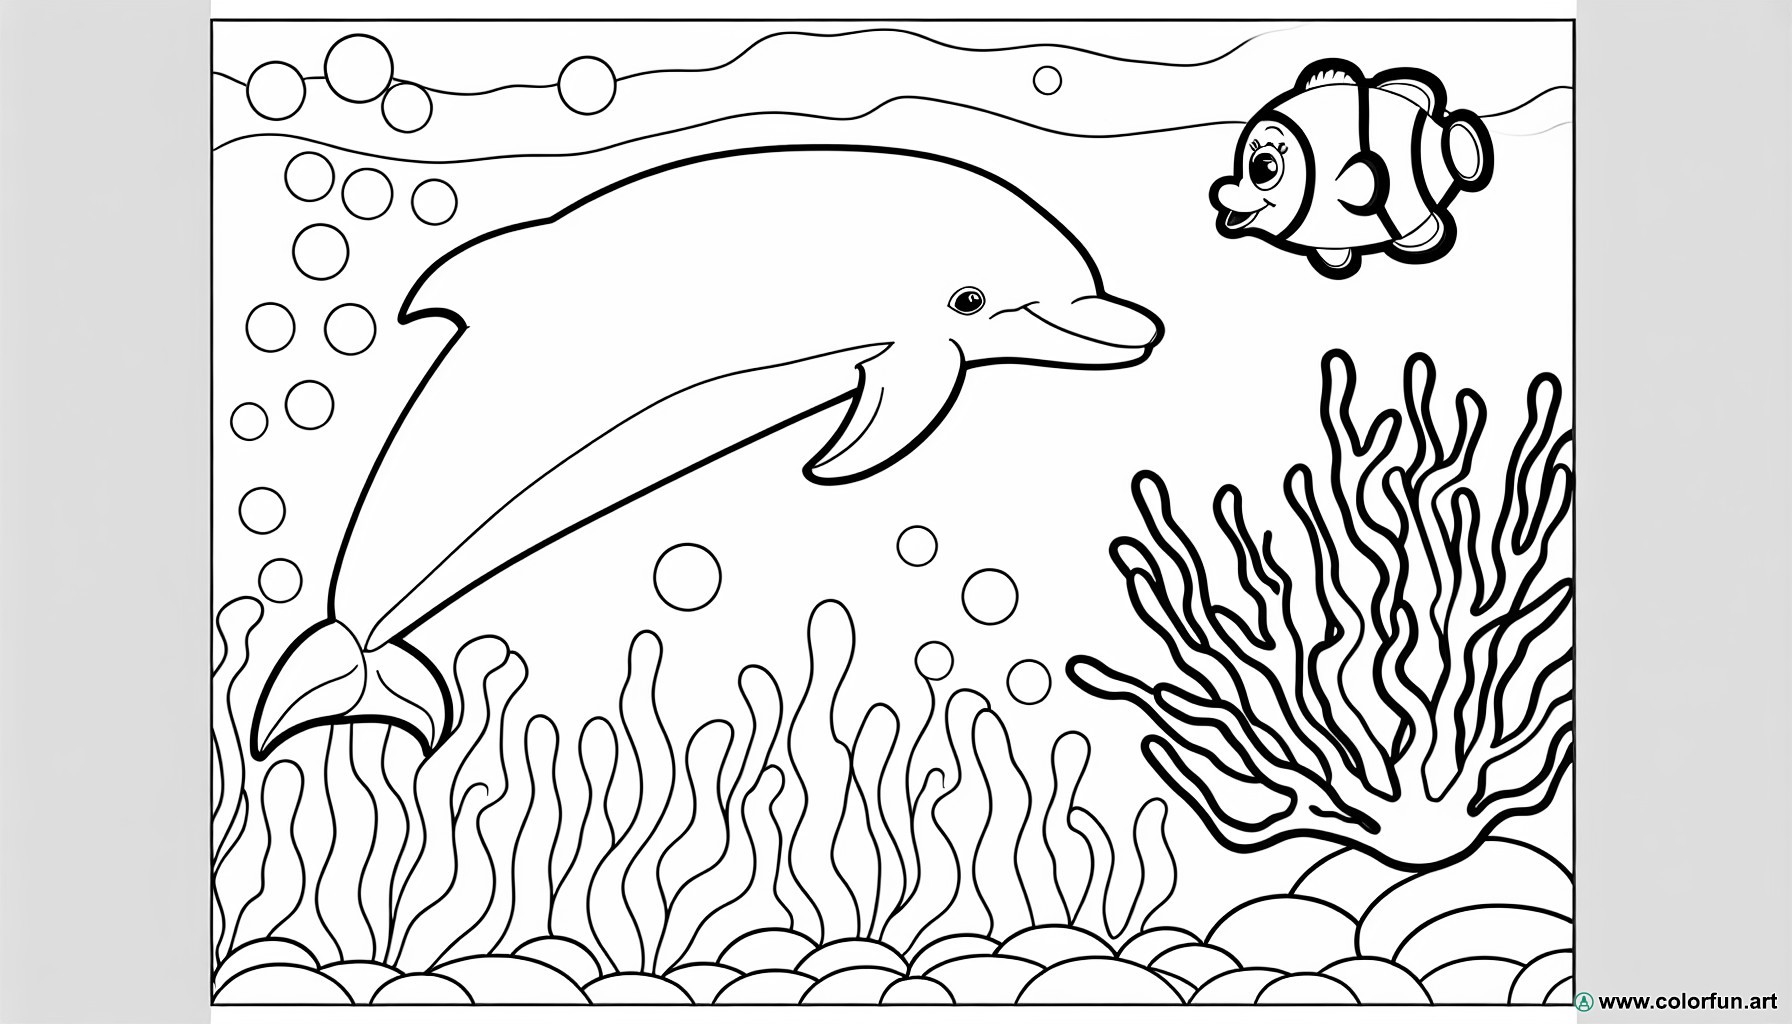 Underwater animals coloring page